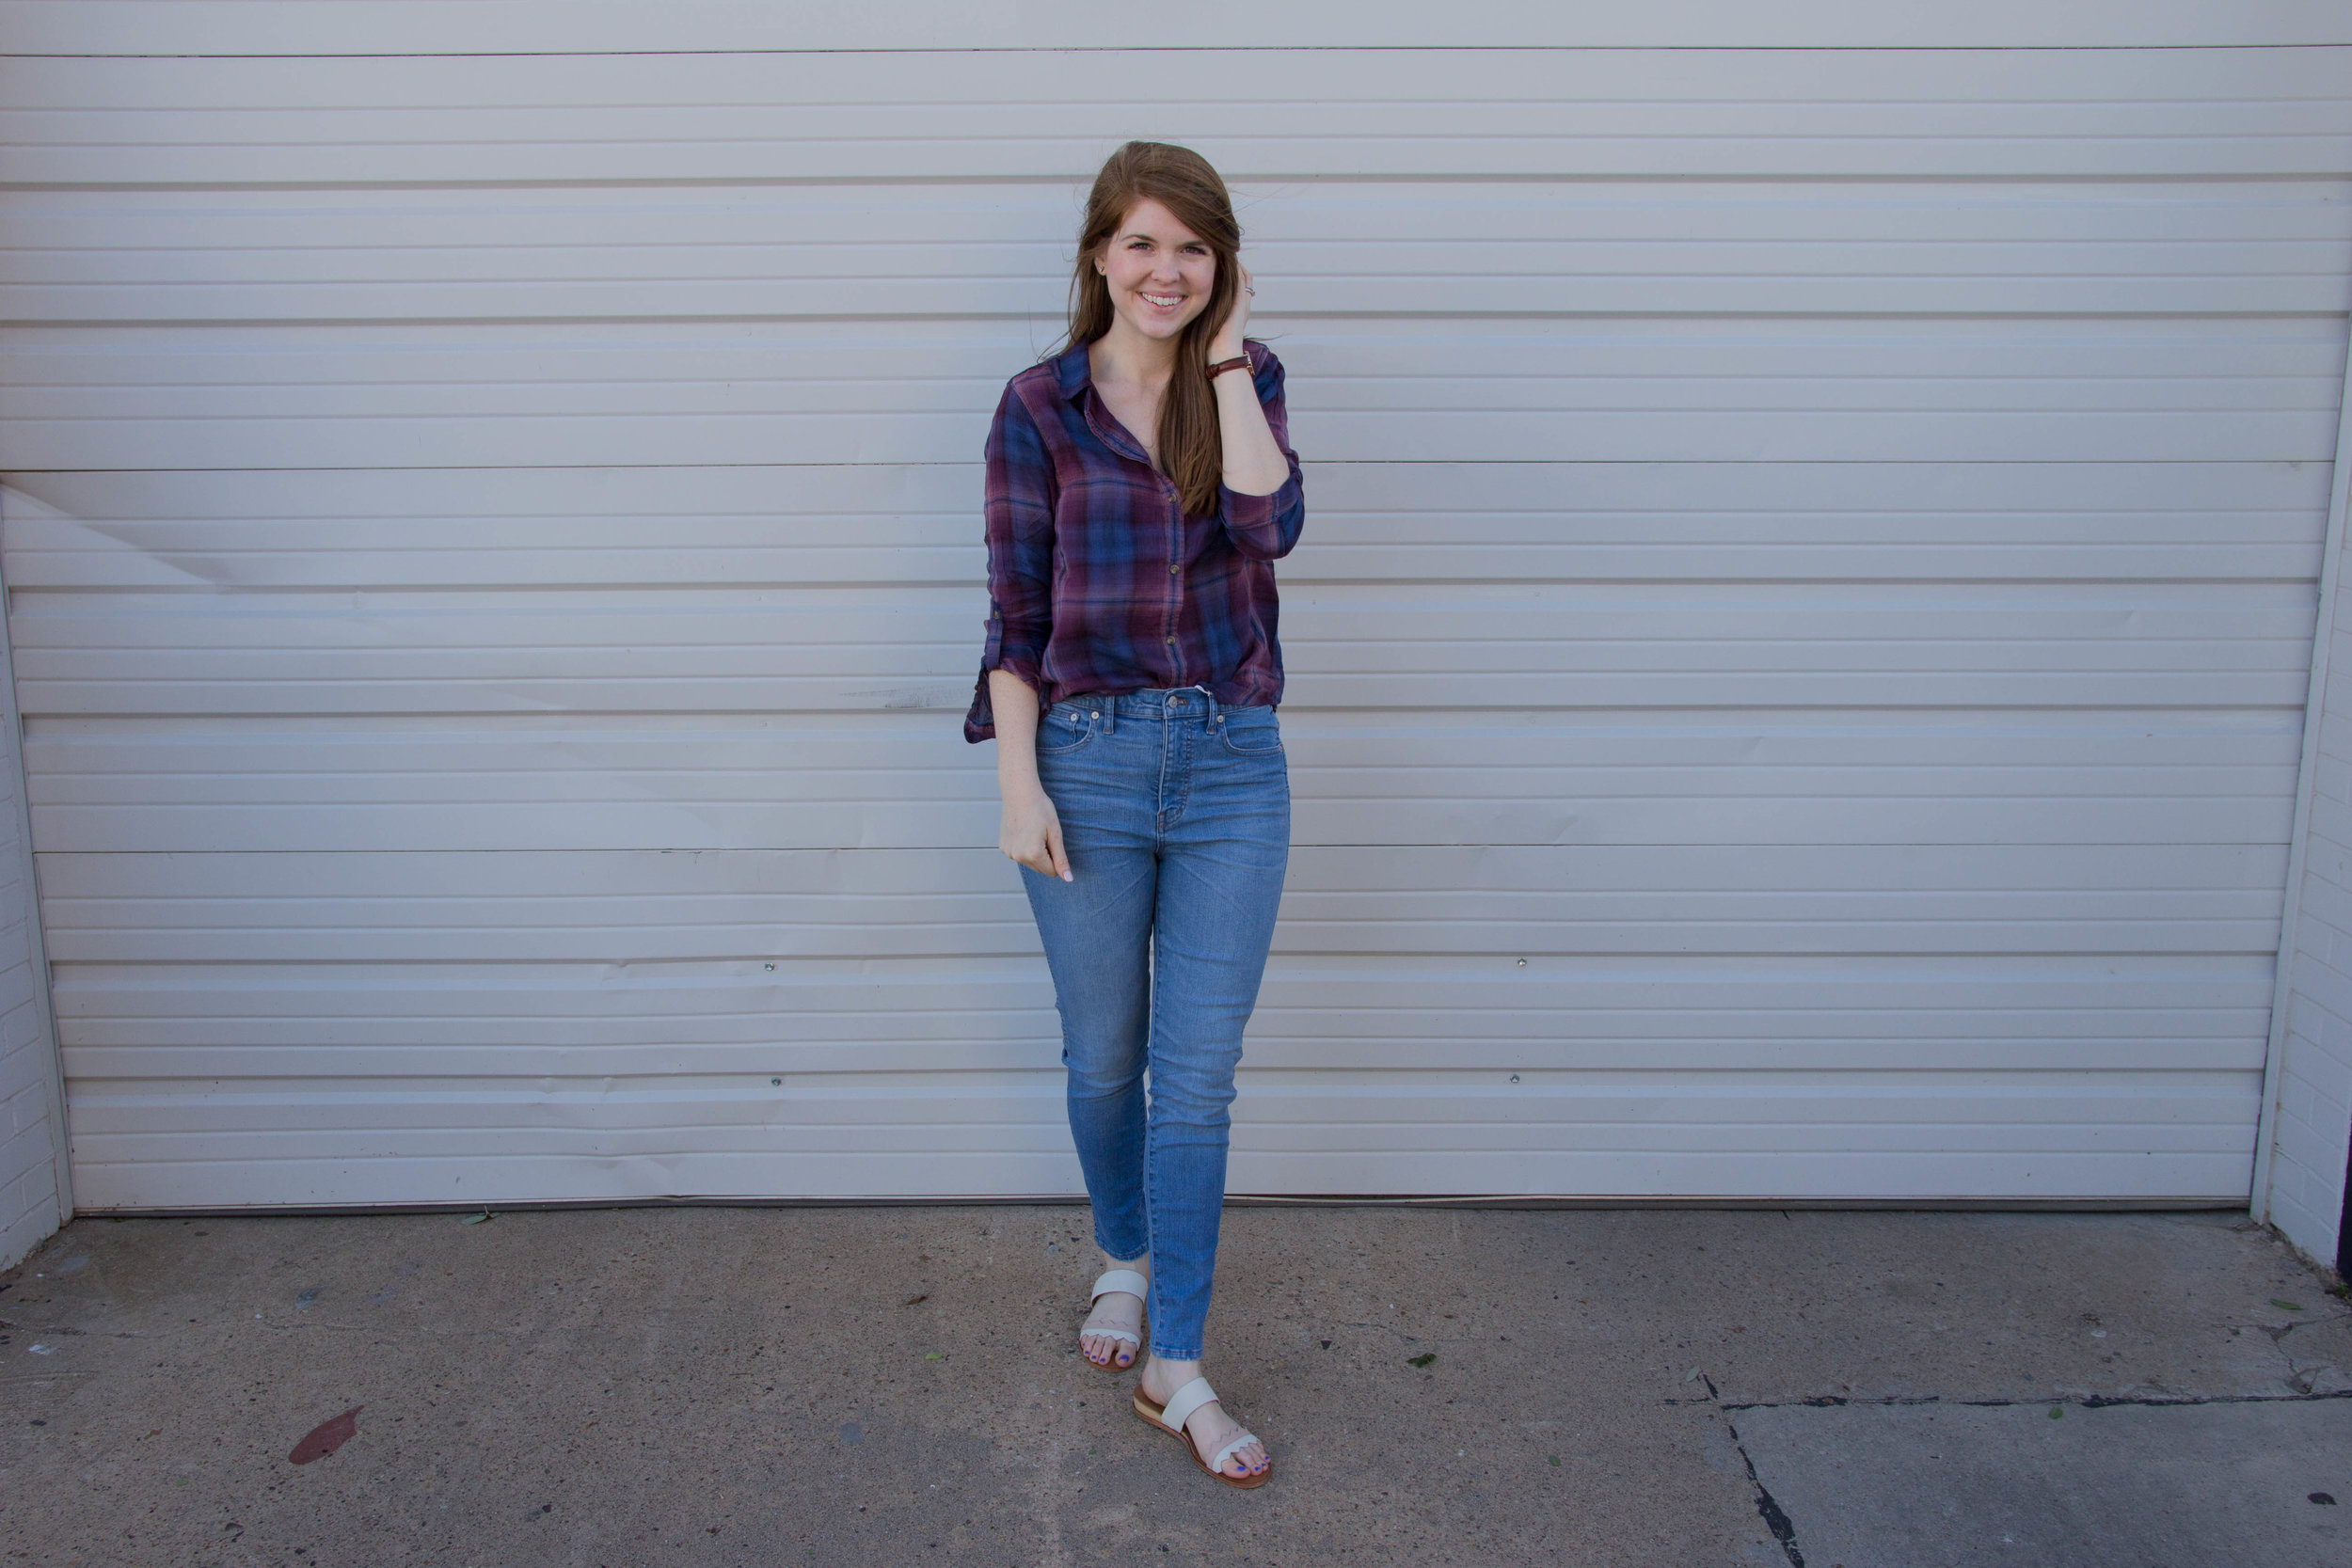 madewell hank wash 10" jeans, daniel wellington leather classic petite watch, dolce vita pacer slides, american eagle plaid top, light jeans, denim jackets, and other things I thought I'd never wear again